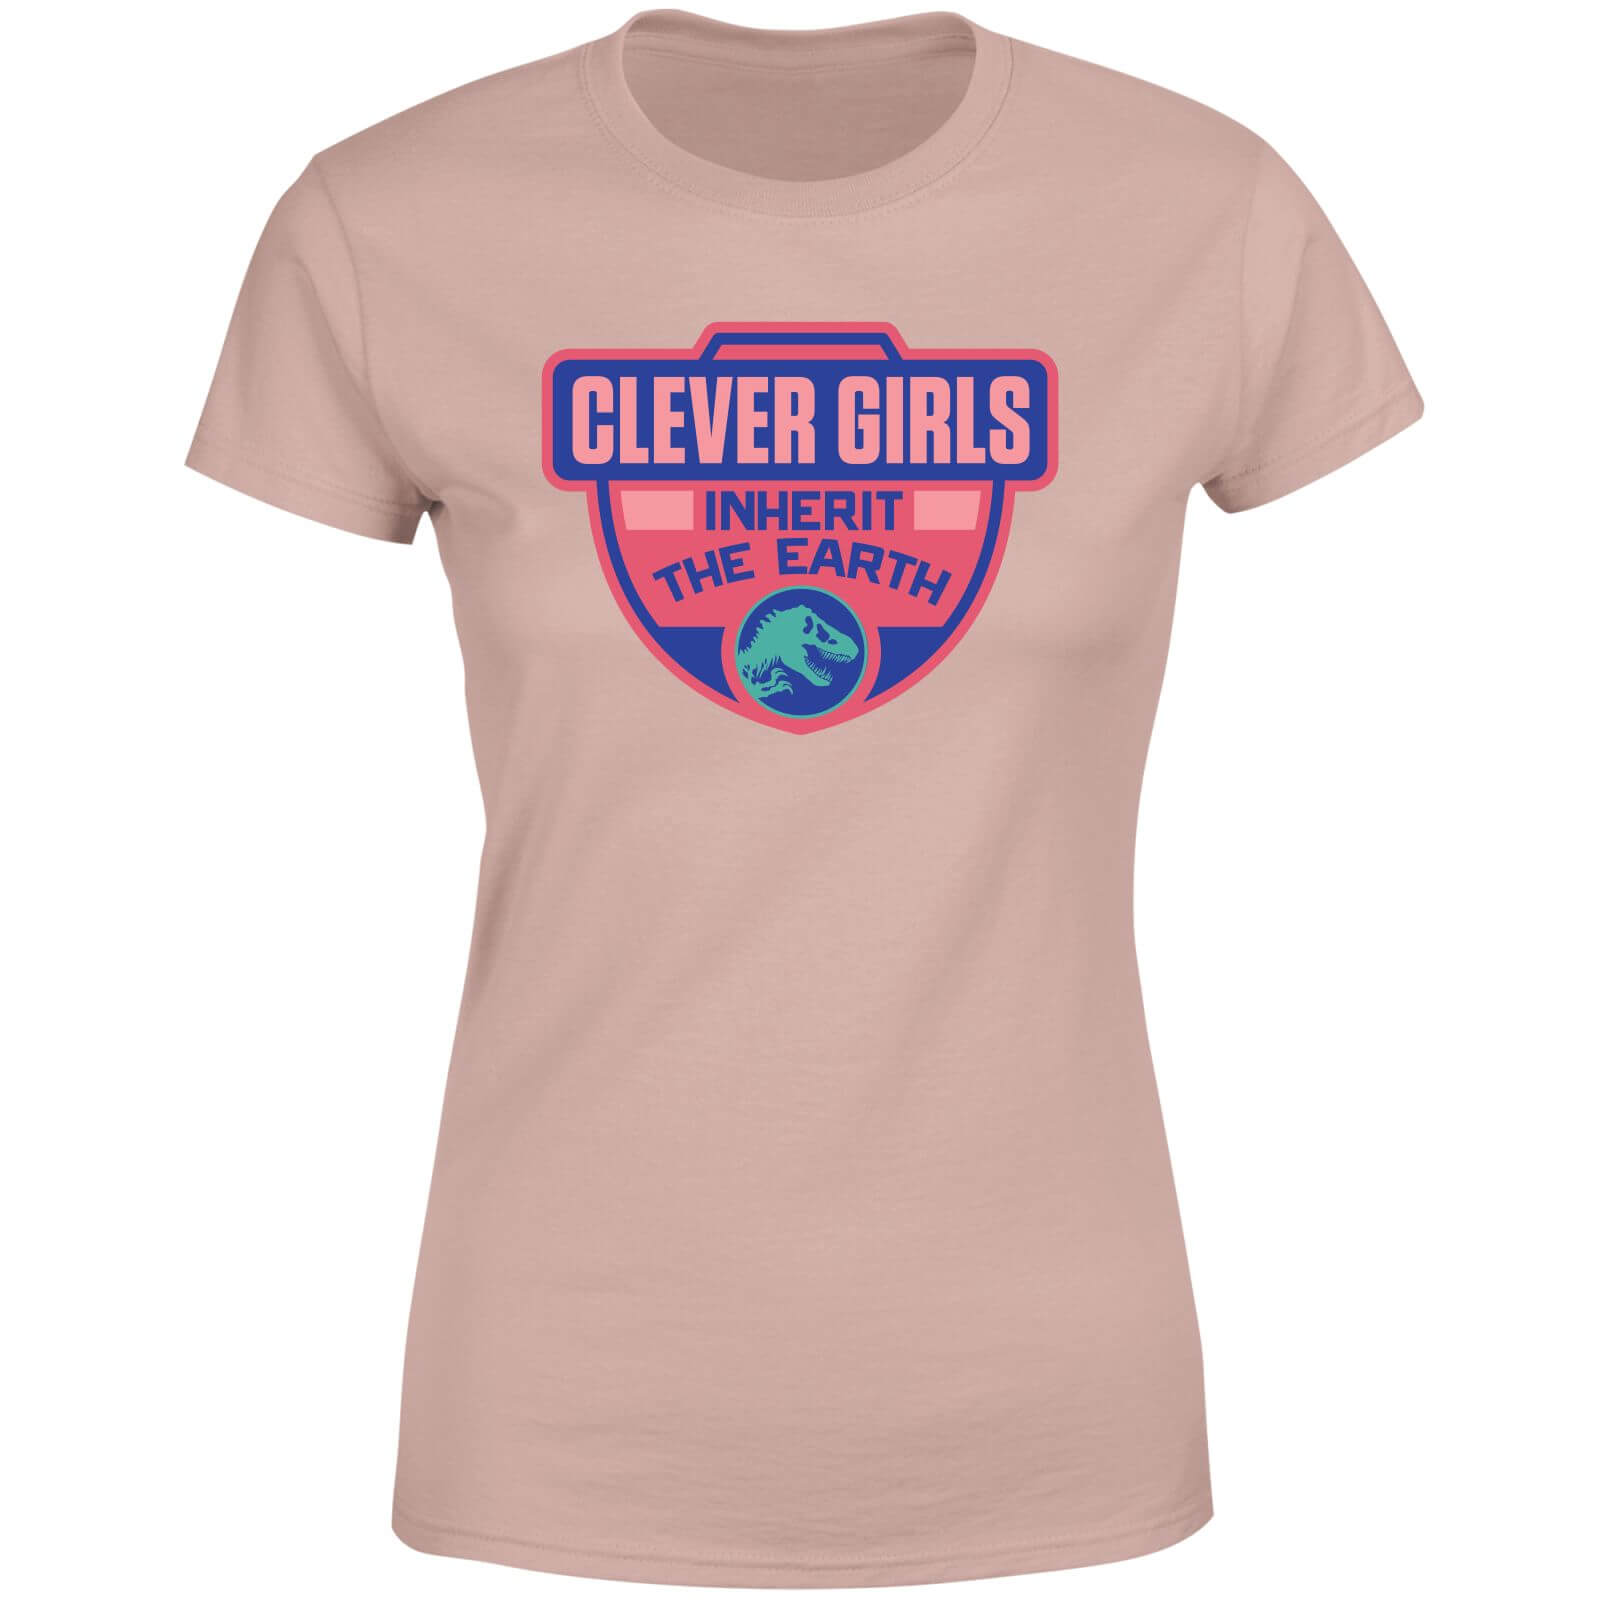 Jurassic Park Clever Girls Inherit The Earth Women's T-Shirt - Dusty Pink - XS - Dusty pink